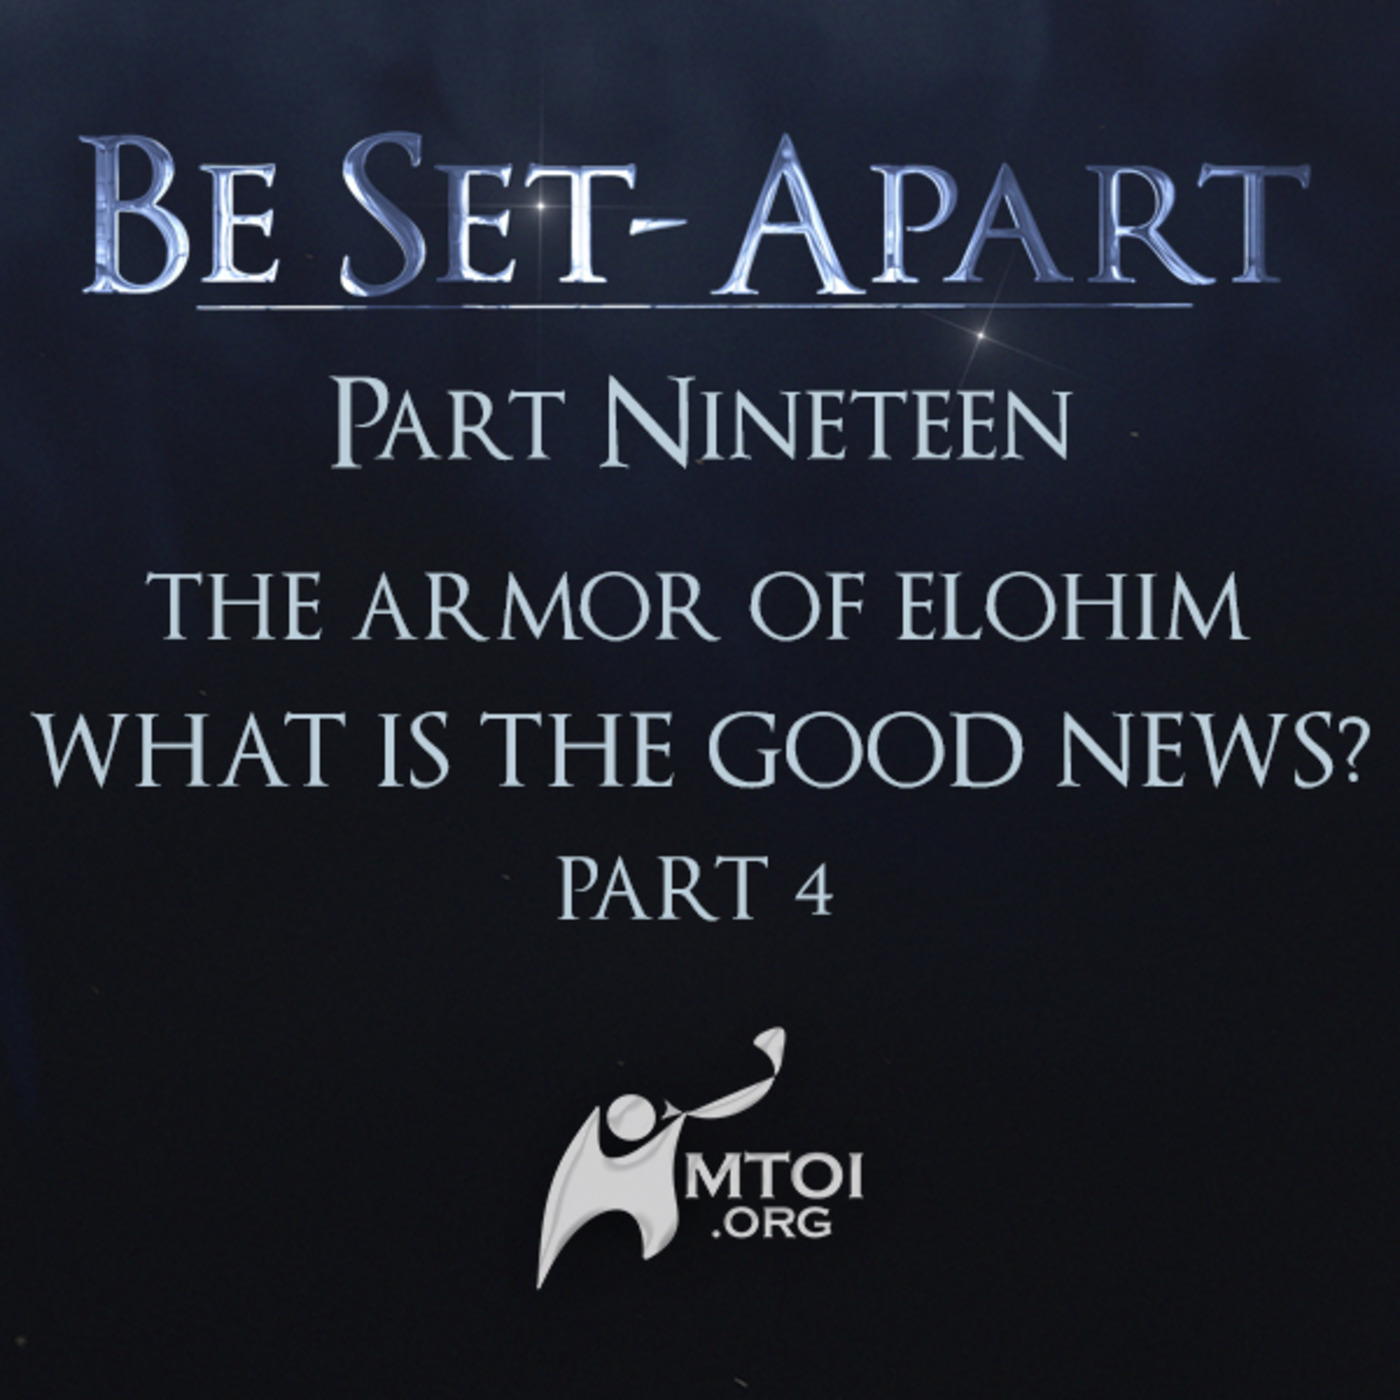 Episode 805: Be Set-Apart | Part Nineteen | The Armor of Elohim | What is the Good News? Part 4